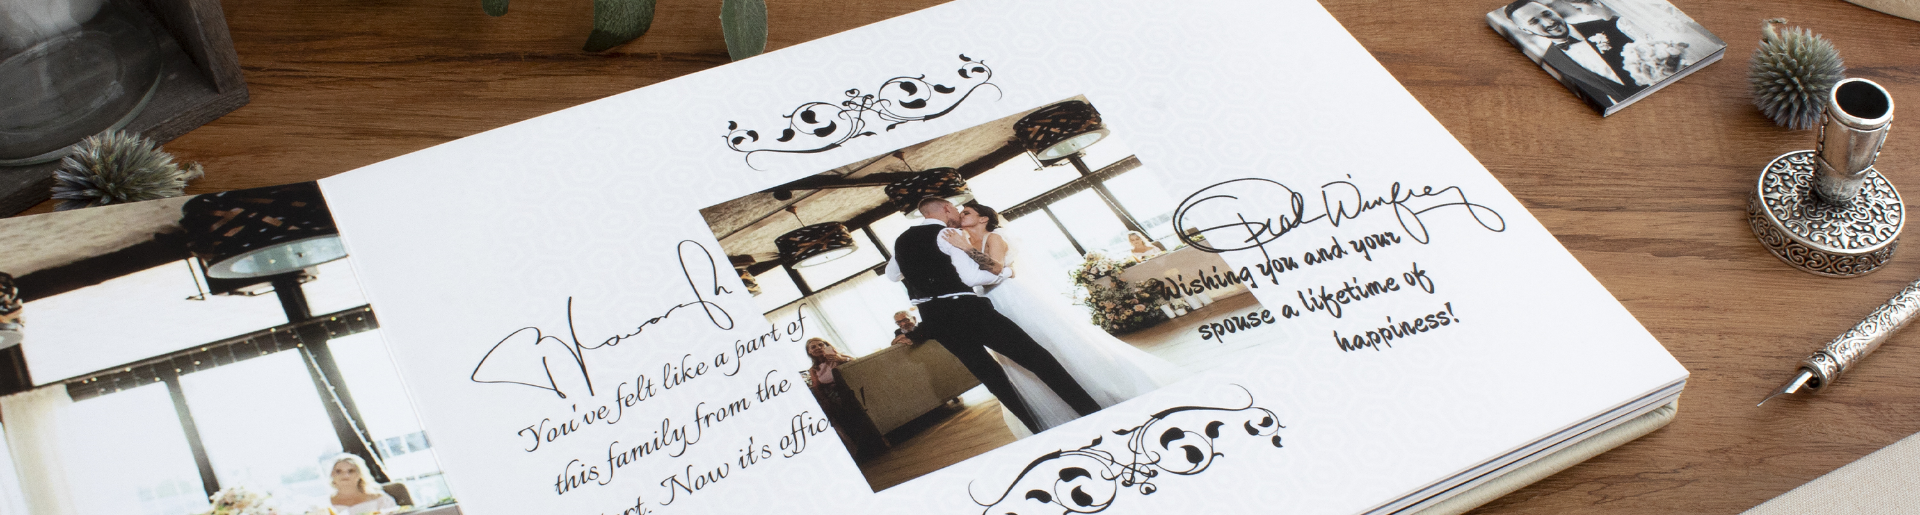 How to Create Your Picture-Perfect Wedding Album, Including Tips